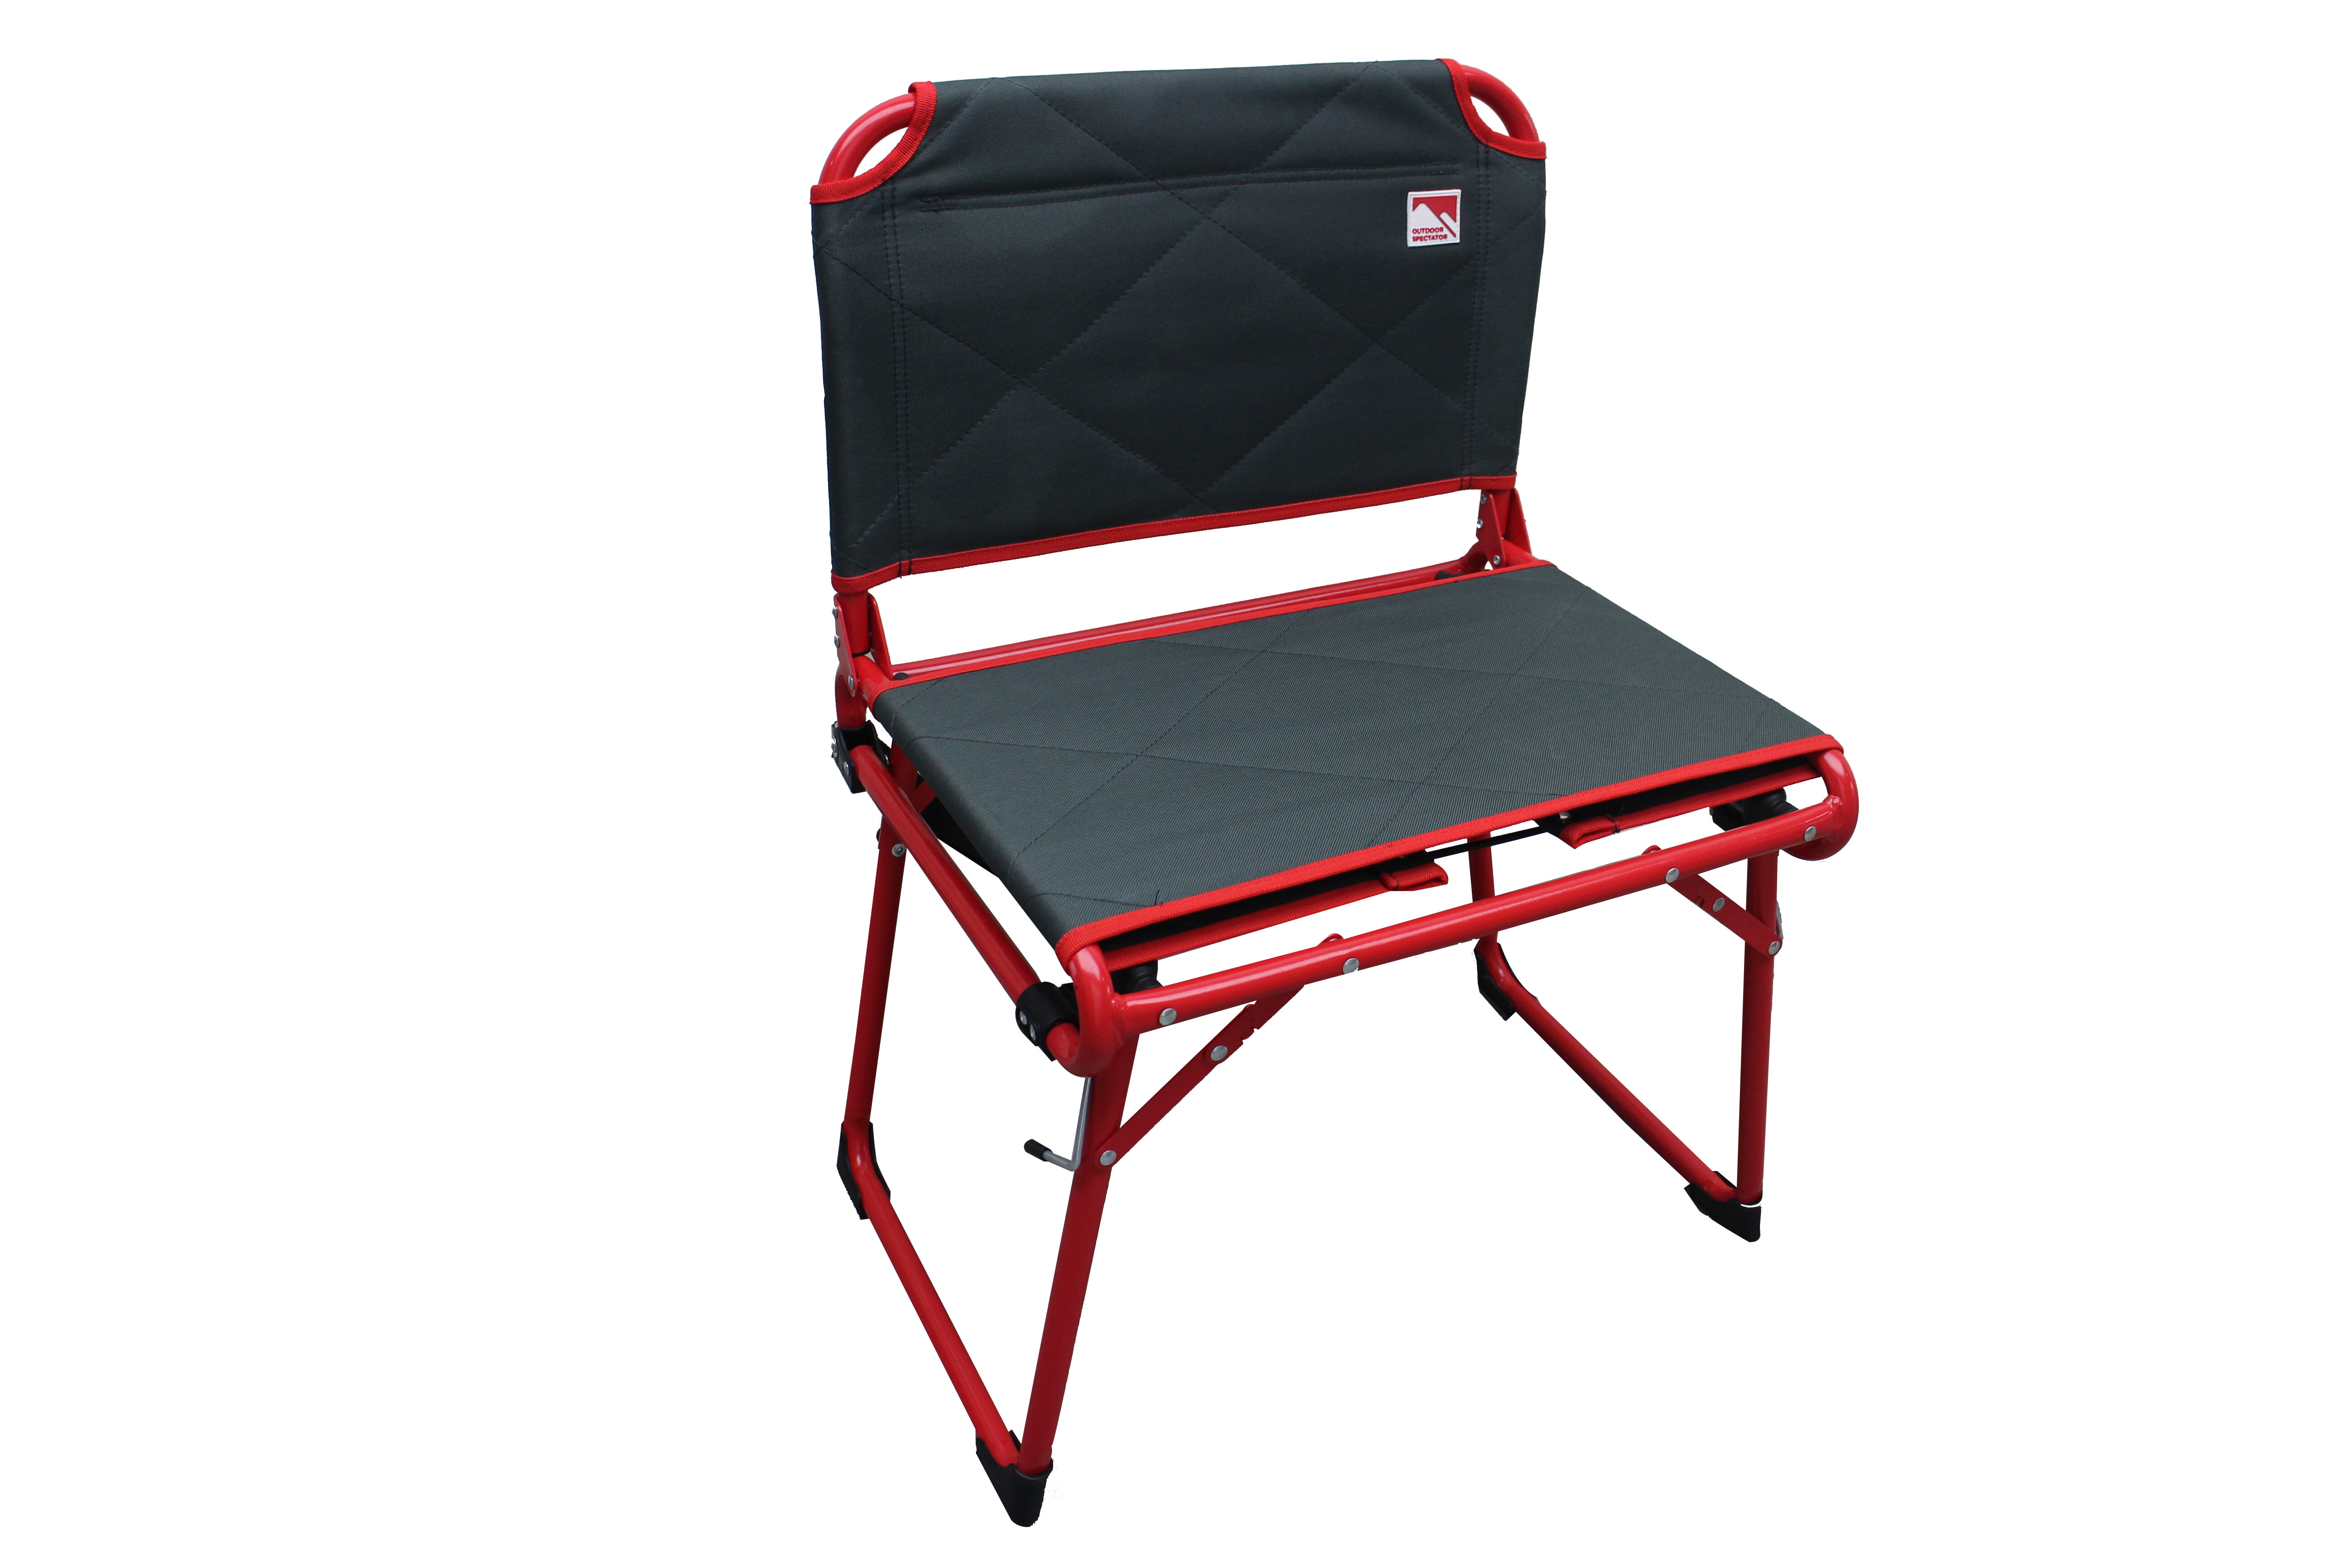 TRENDWAVE SPORTSWEAR Foldable Padded Portable Stadium Lawn Seat with Cushion and Supports 